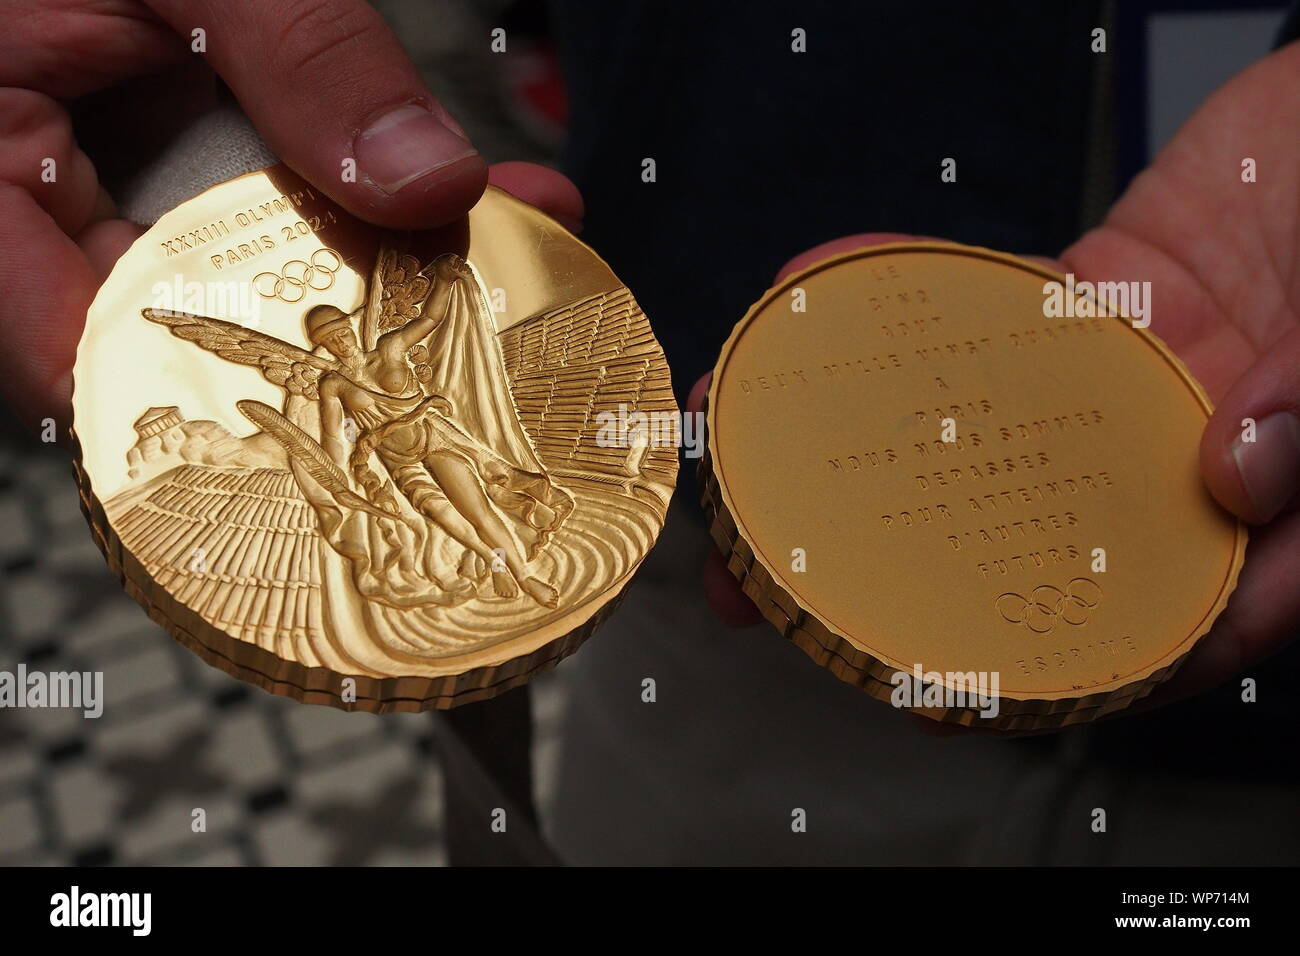 Model Of The Gold Medals That Will Be Used In The Olympic Games Paris 2024 Is Presented At The 130th Session Of The International Olympic Committee Which Is Being Held In Lima WP714M 